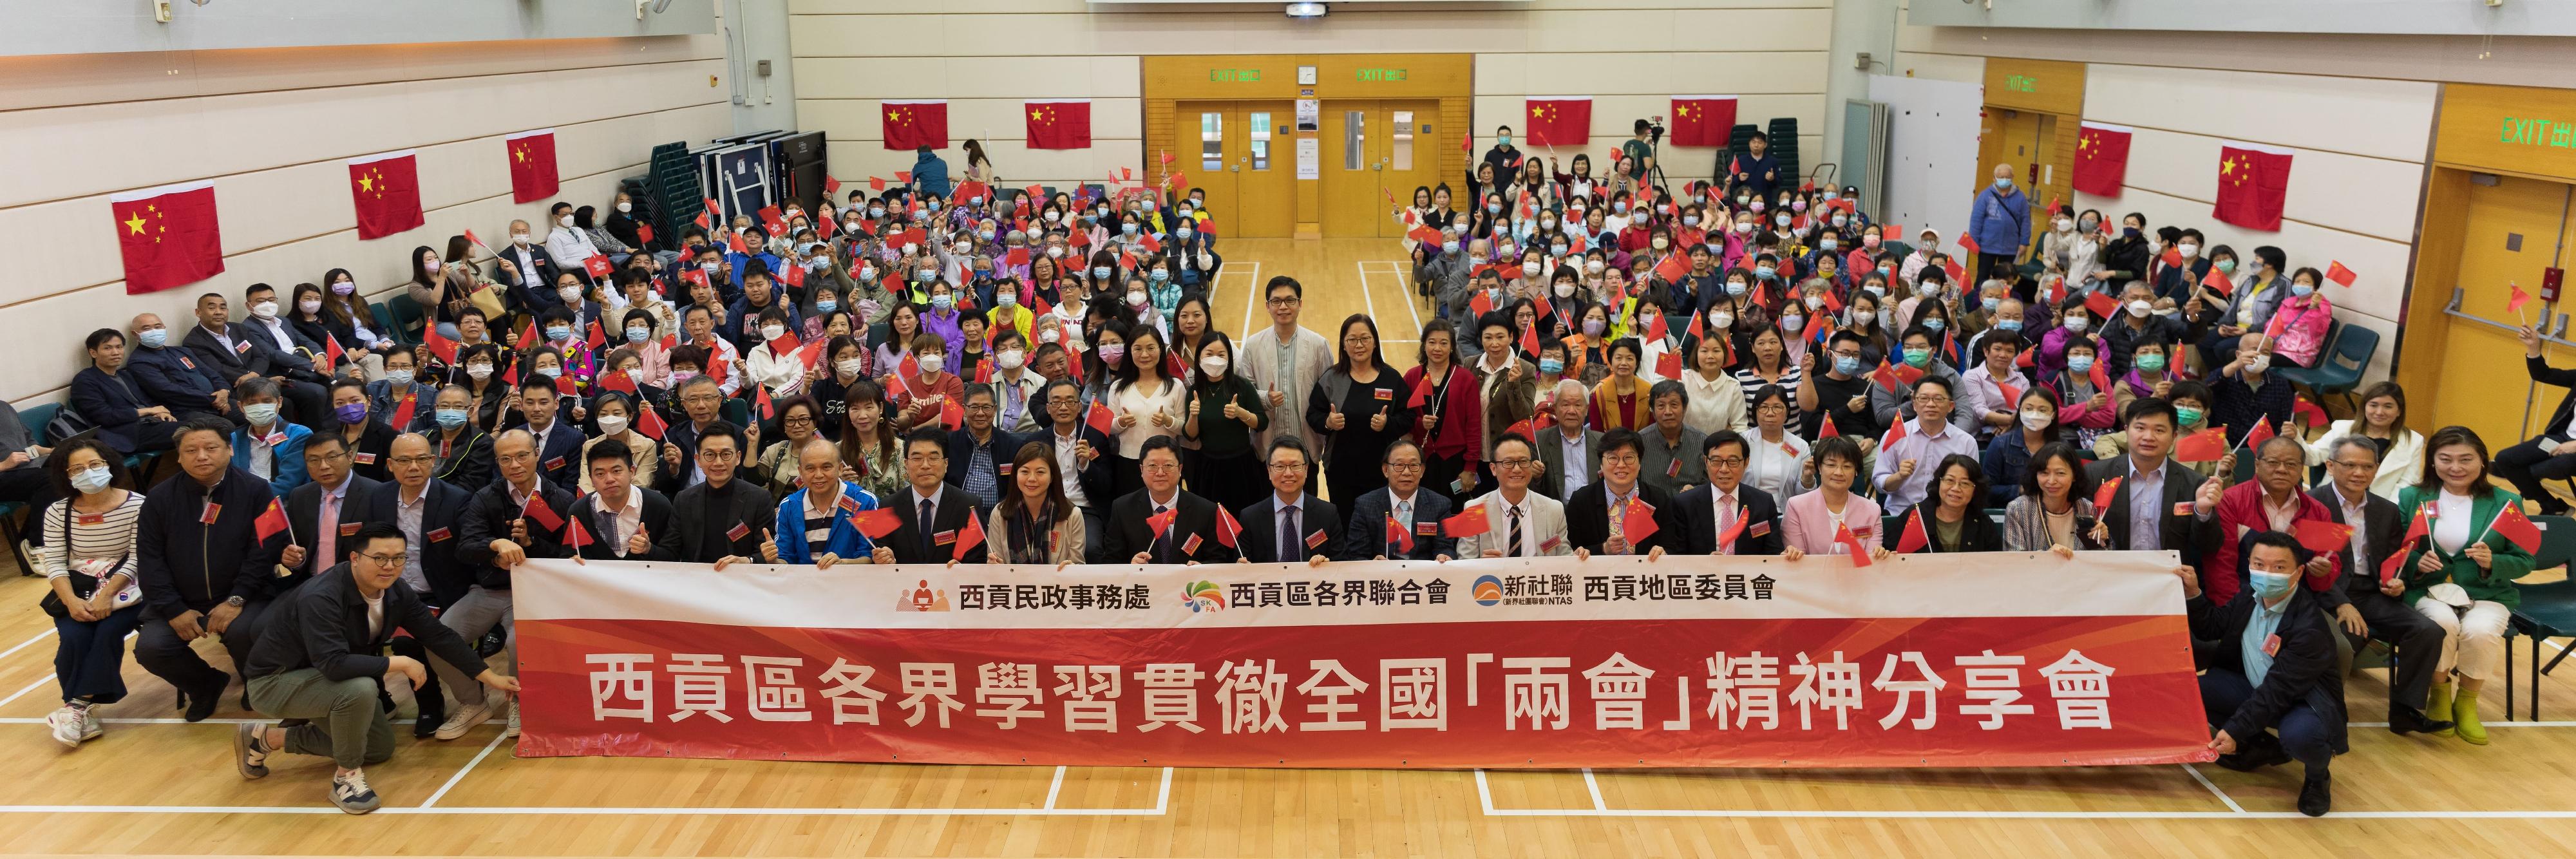 District Offices have held seminars on "Spirit of the 'two sessions'" to study the essentials of the "two sessions" this year and its important guidance for Hong Kong's future development. The Sai Kung District Office, together with the New Territories Association of Societies Sai Kung District Committee and the Sai Kung Federation of Associations, held a seminar on "Spirit of the 'two sessions'" on March 31 at Sheung Tak Community Hall. Photo shows guests and participants at the seminar.